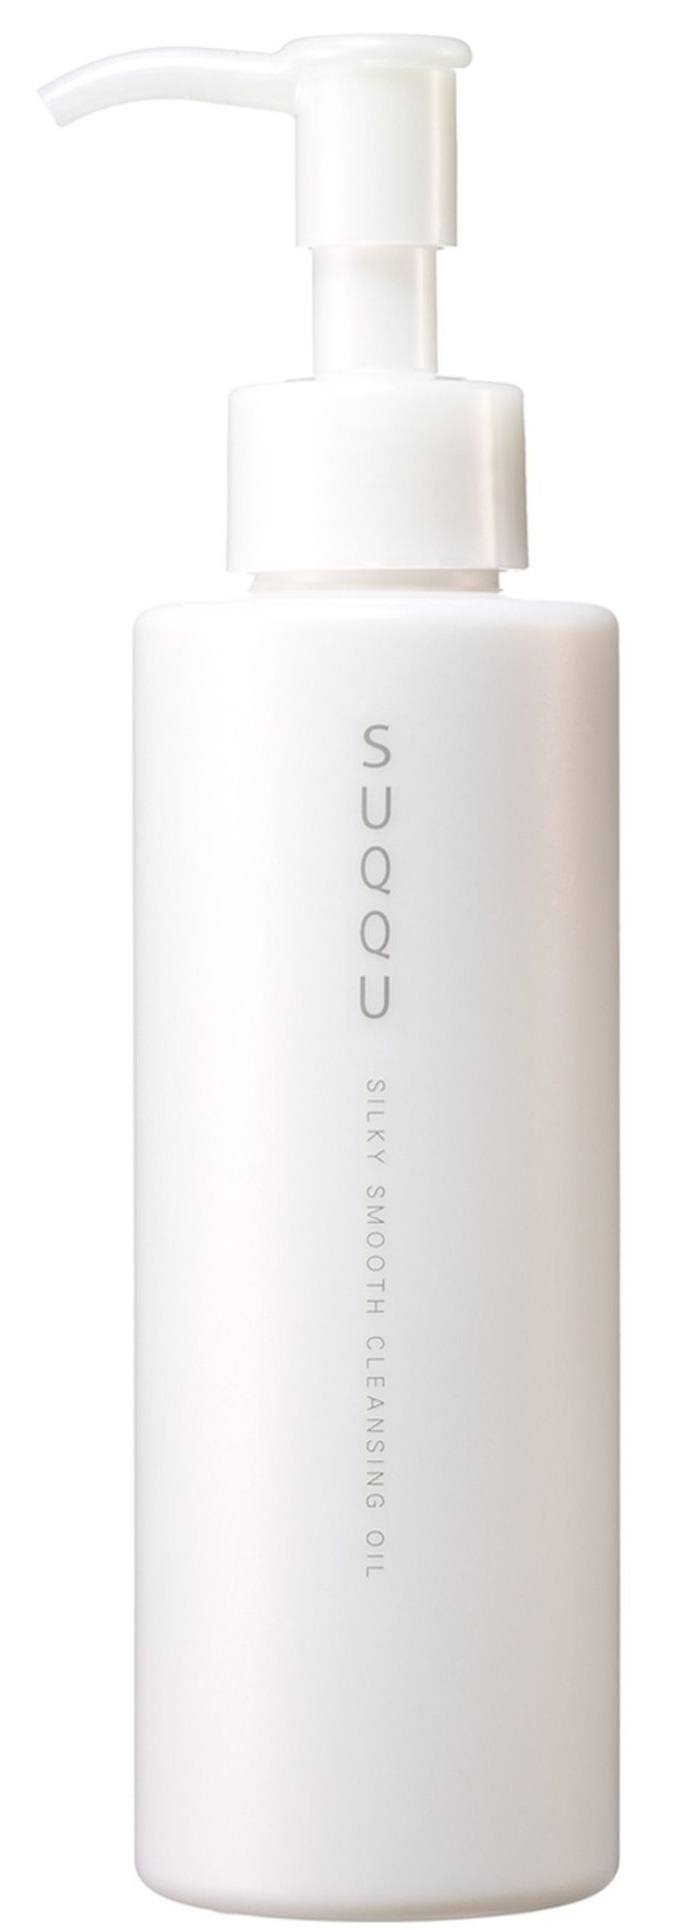 Suqqu Silky Smooth Cleansing Oil